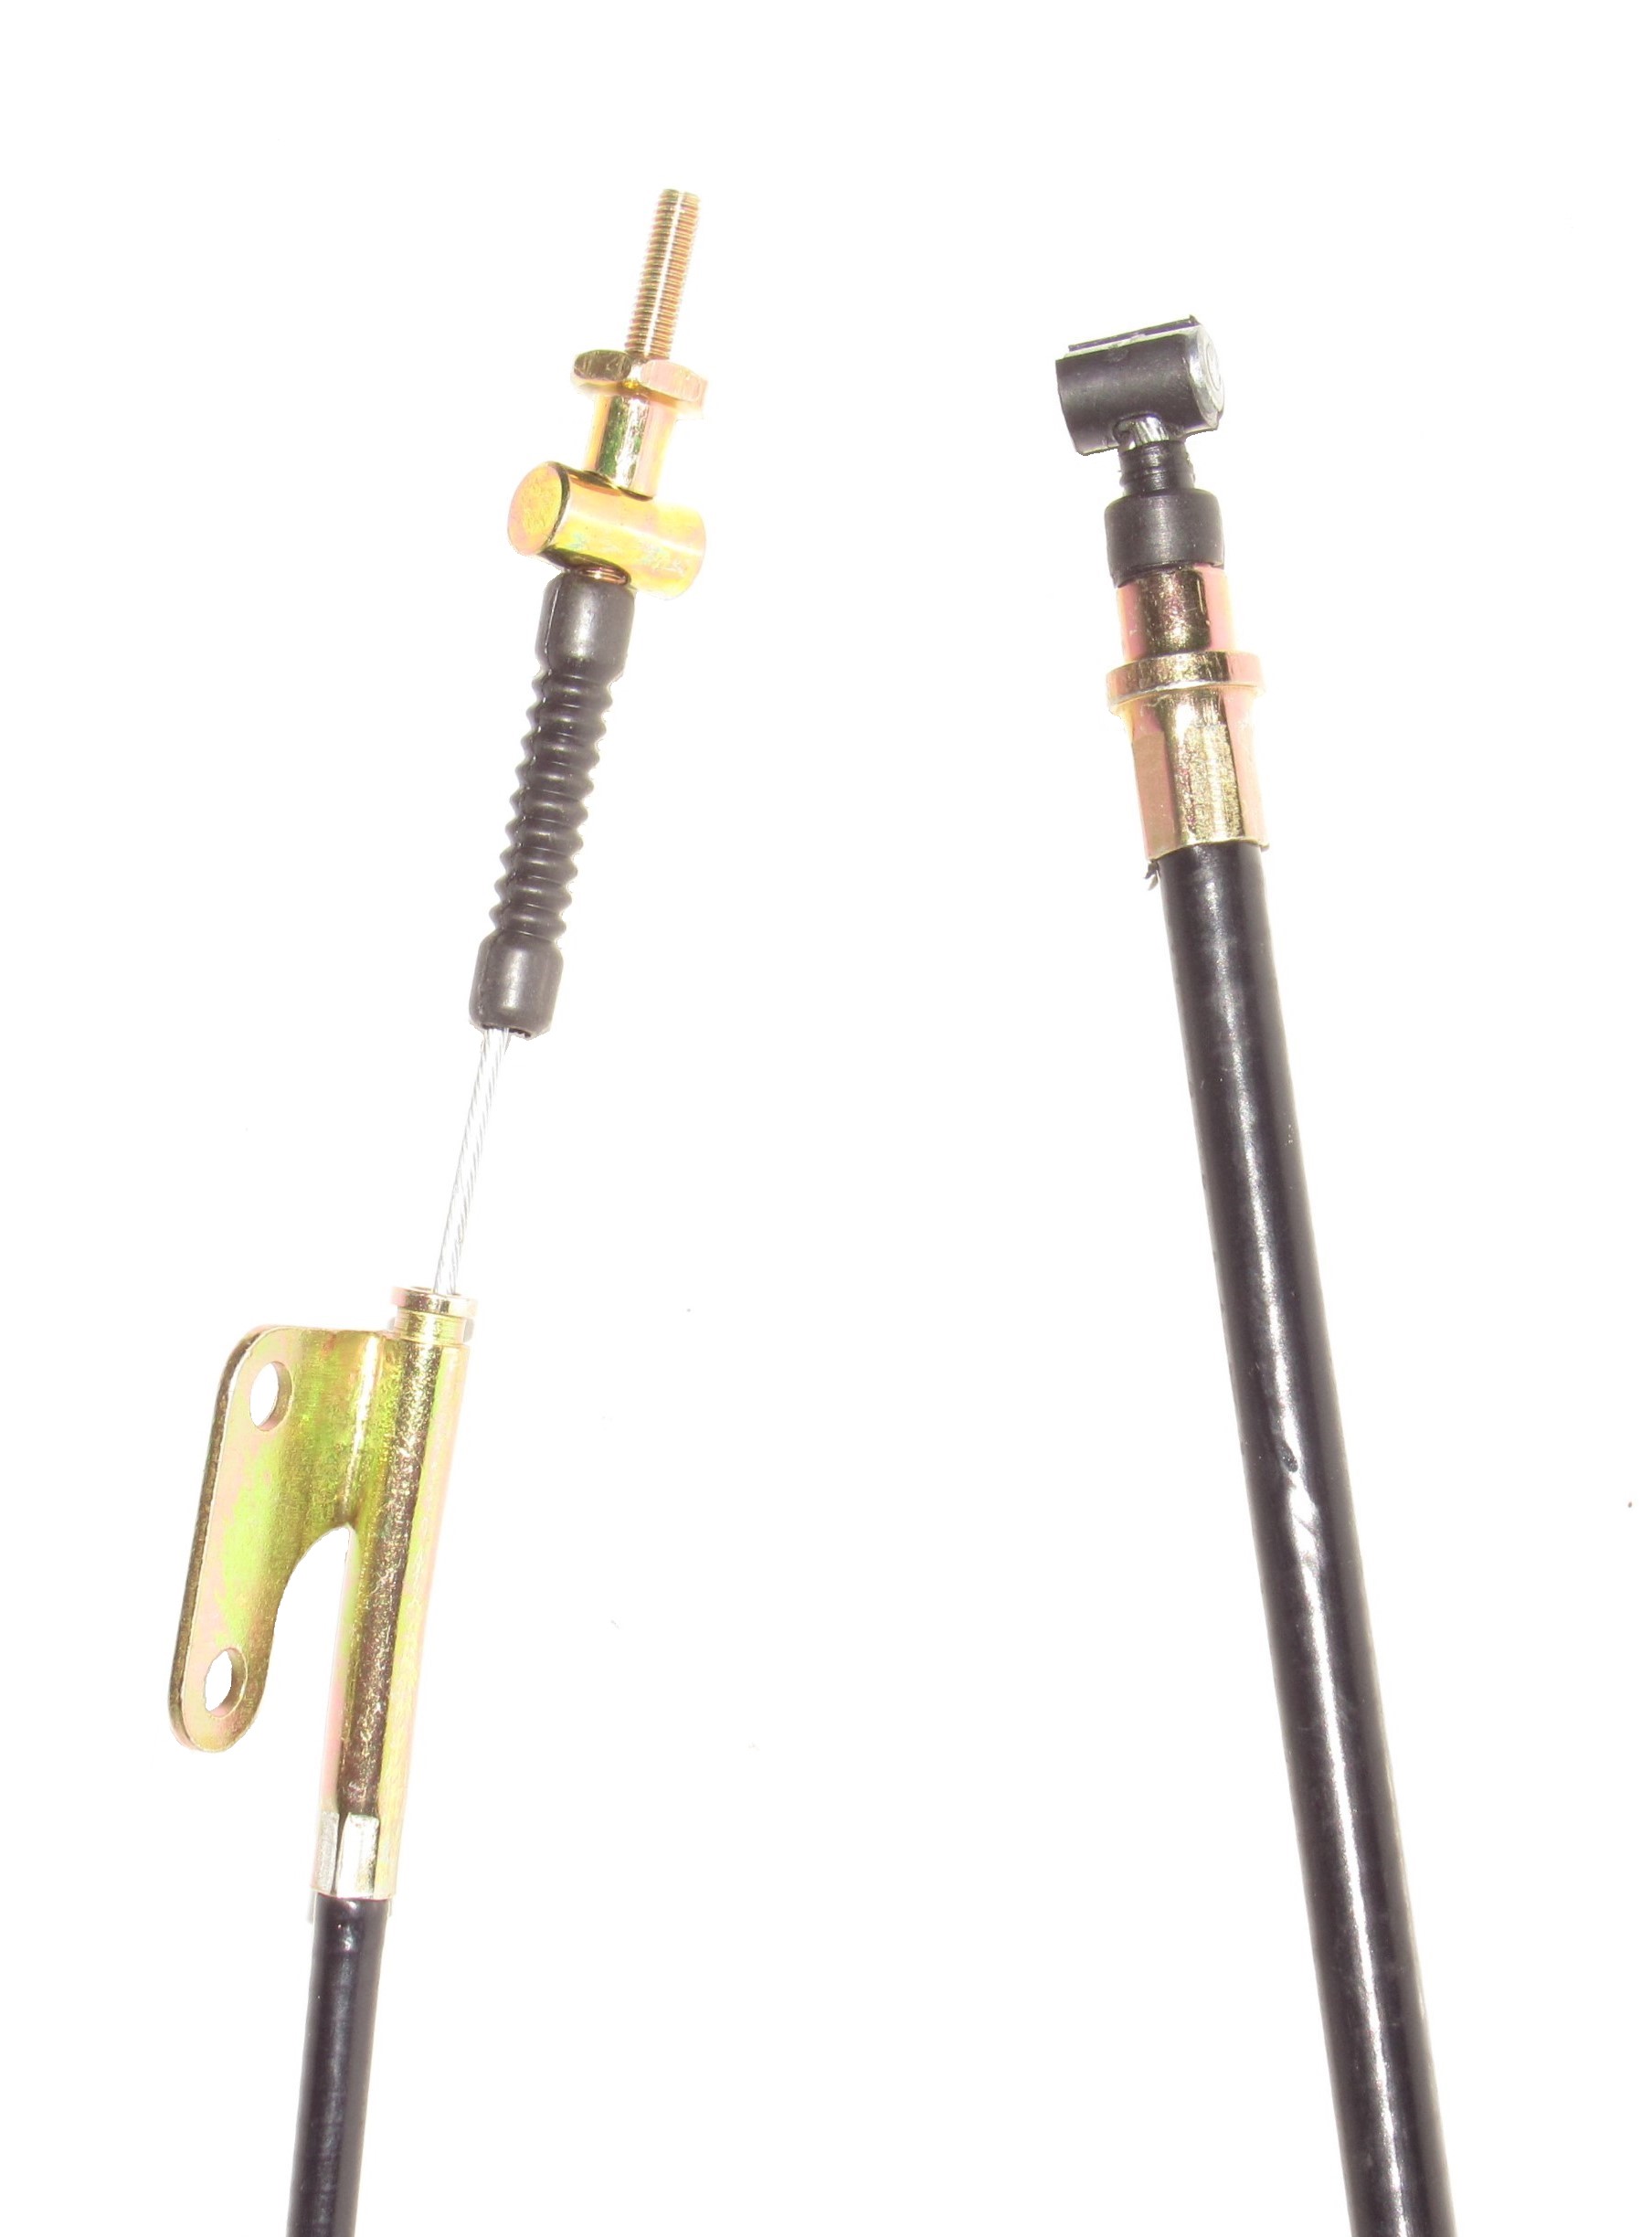 Rear Brake Cable Out=60.5" / Inner=66.25" Bolt Holes C/C=28mm Fits Many 50-250cc ATVs